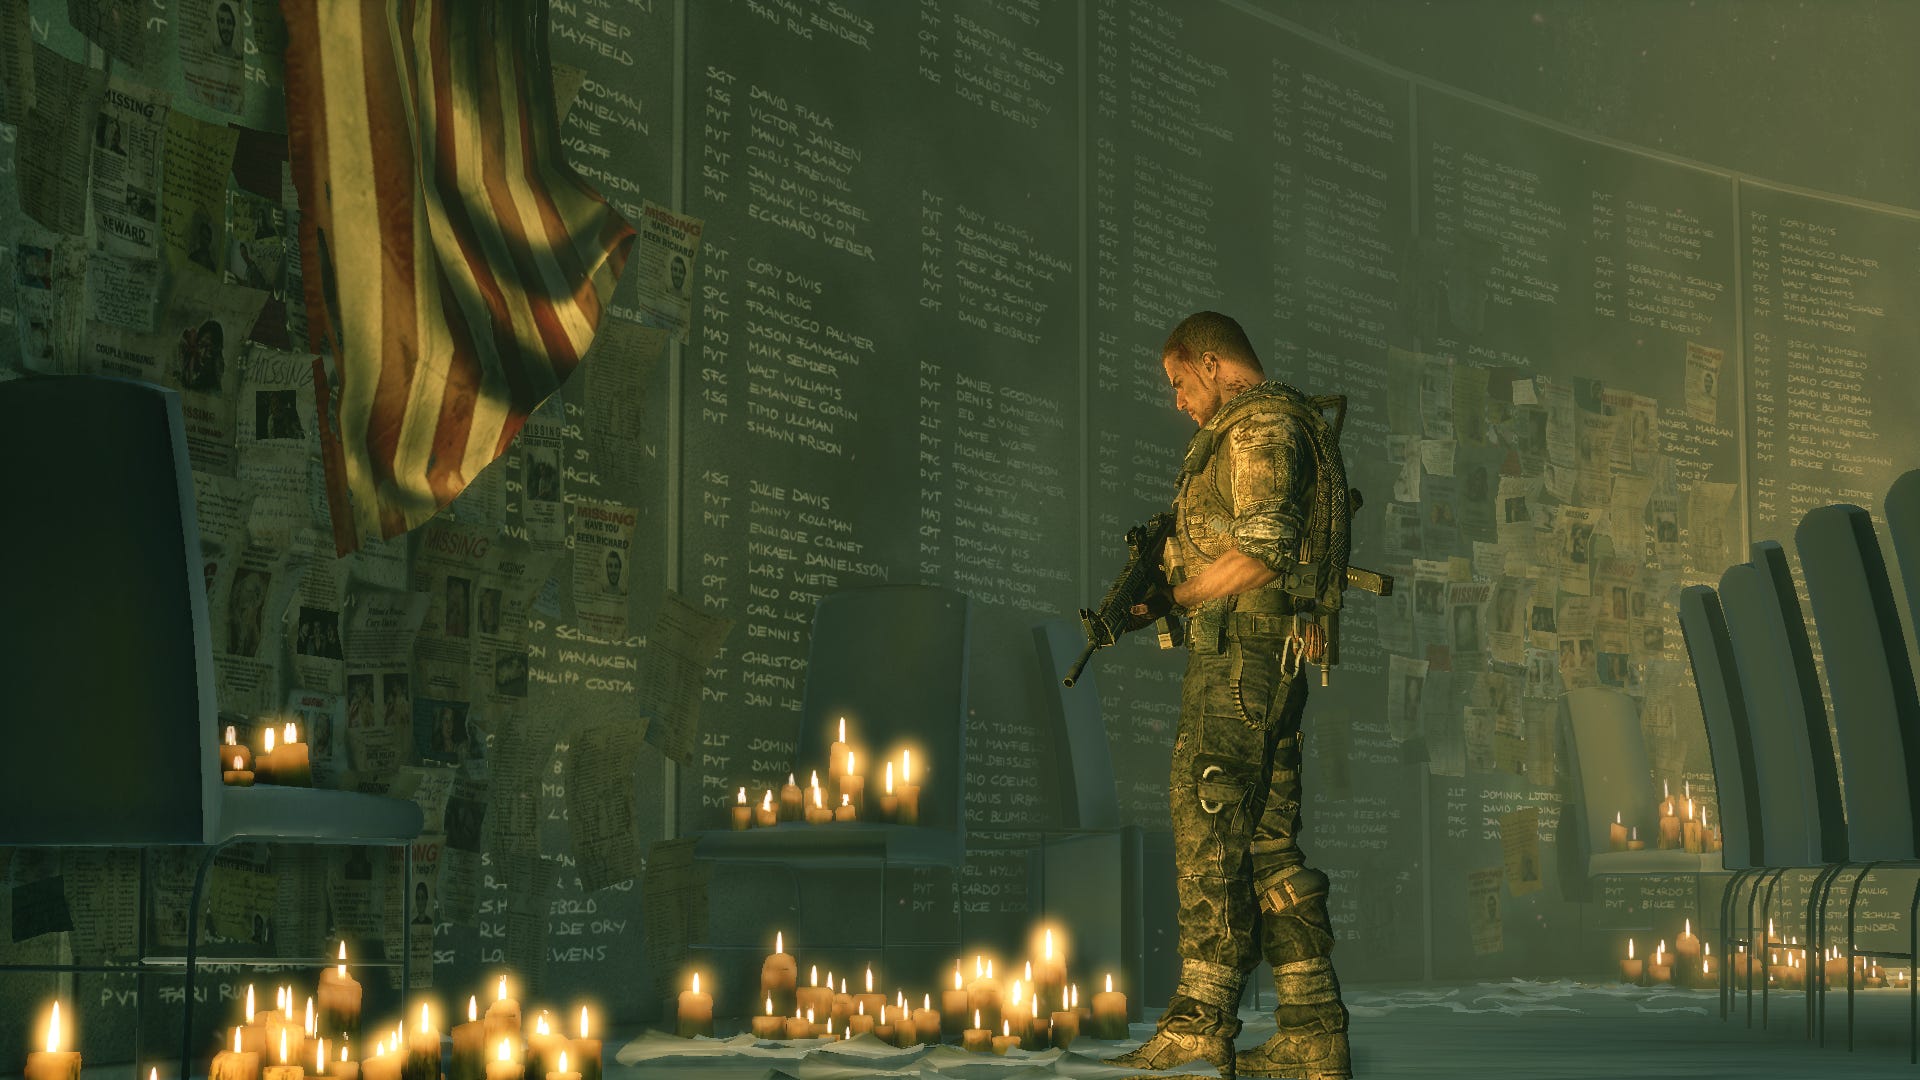 Spec Ops: The Line has been delisted from Steam due to expiring licenses, 2K say